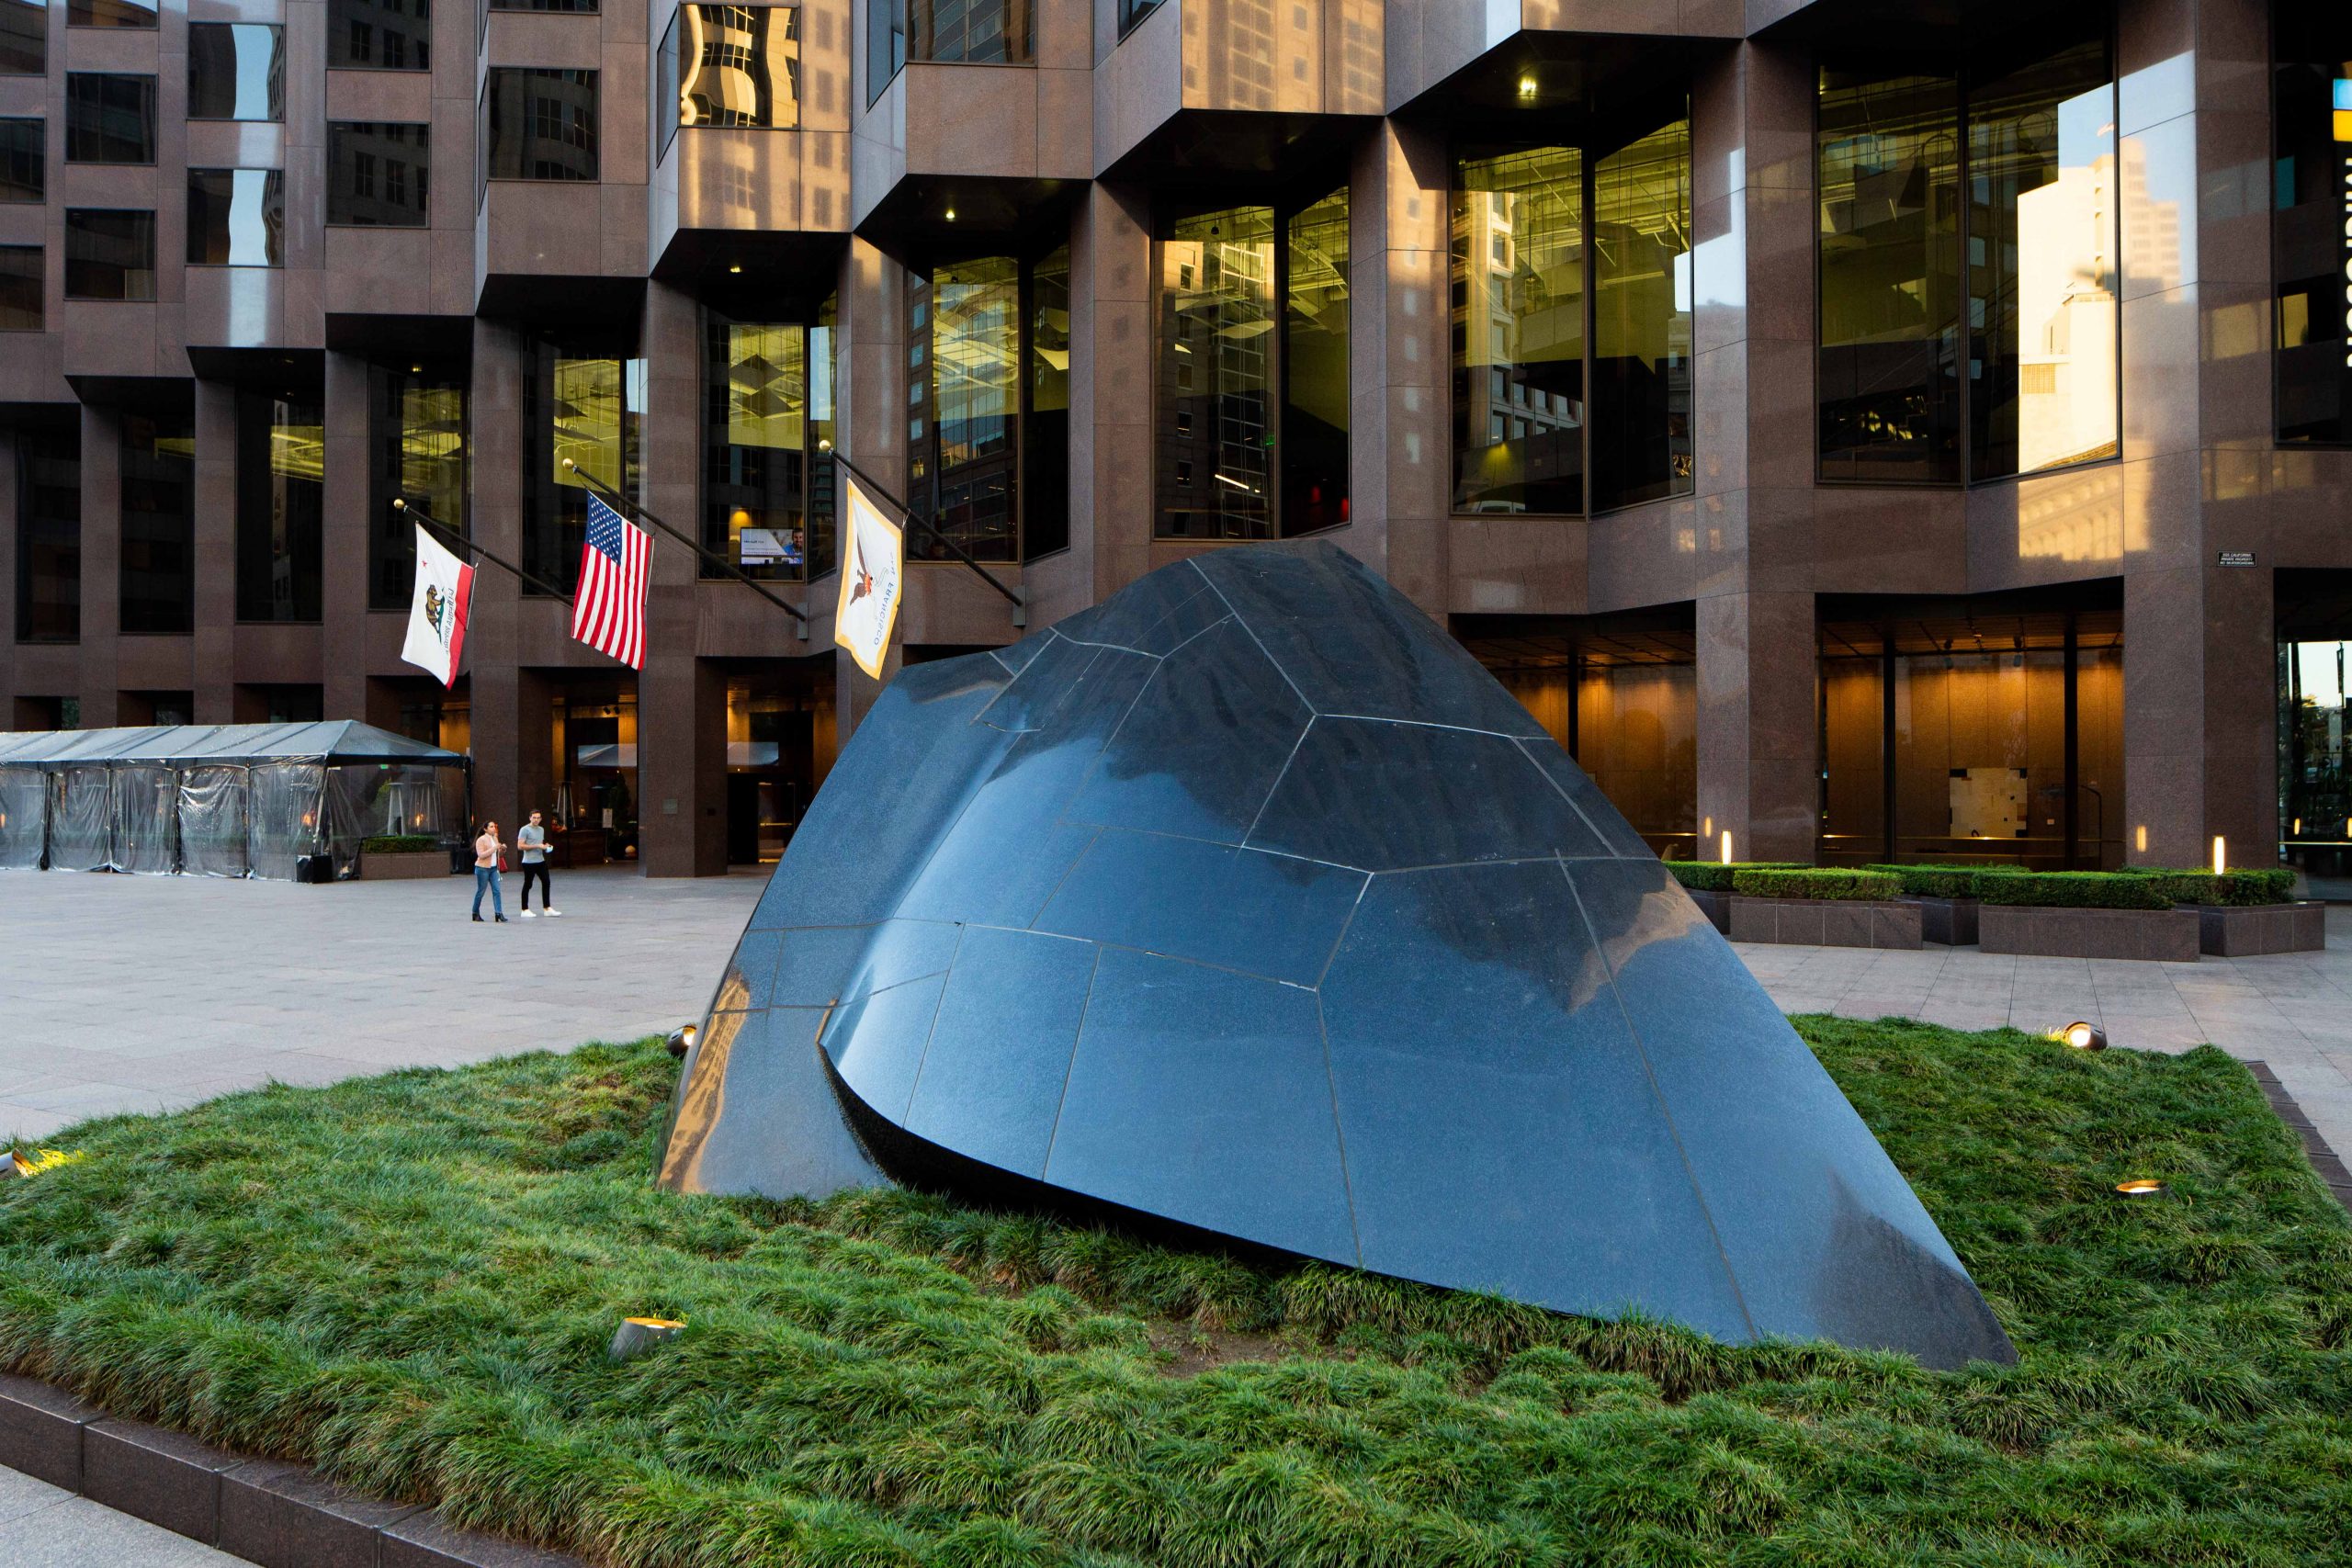 Transcendence, also knwon as The Banker's Heart sculpture by Masayuki Nagare at 555 California Street, image by Andrew Campbell Nelson